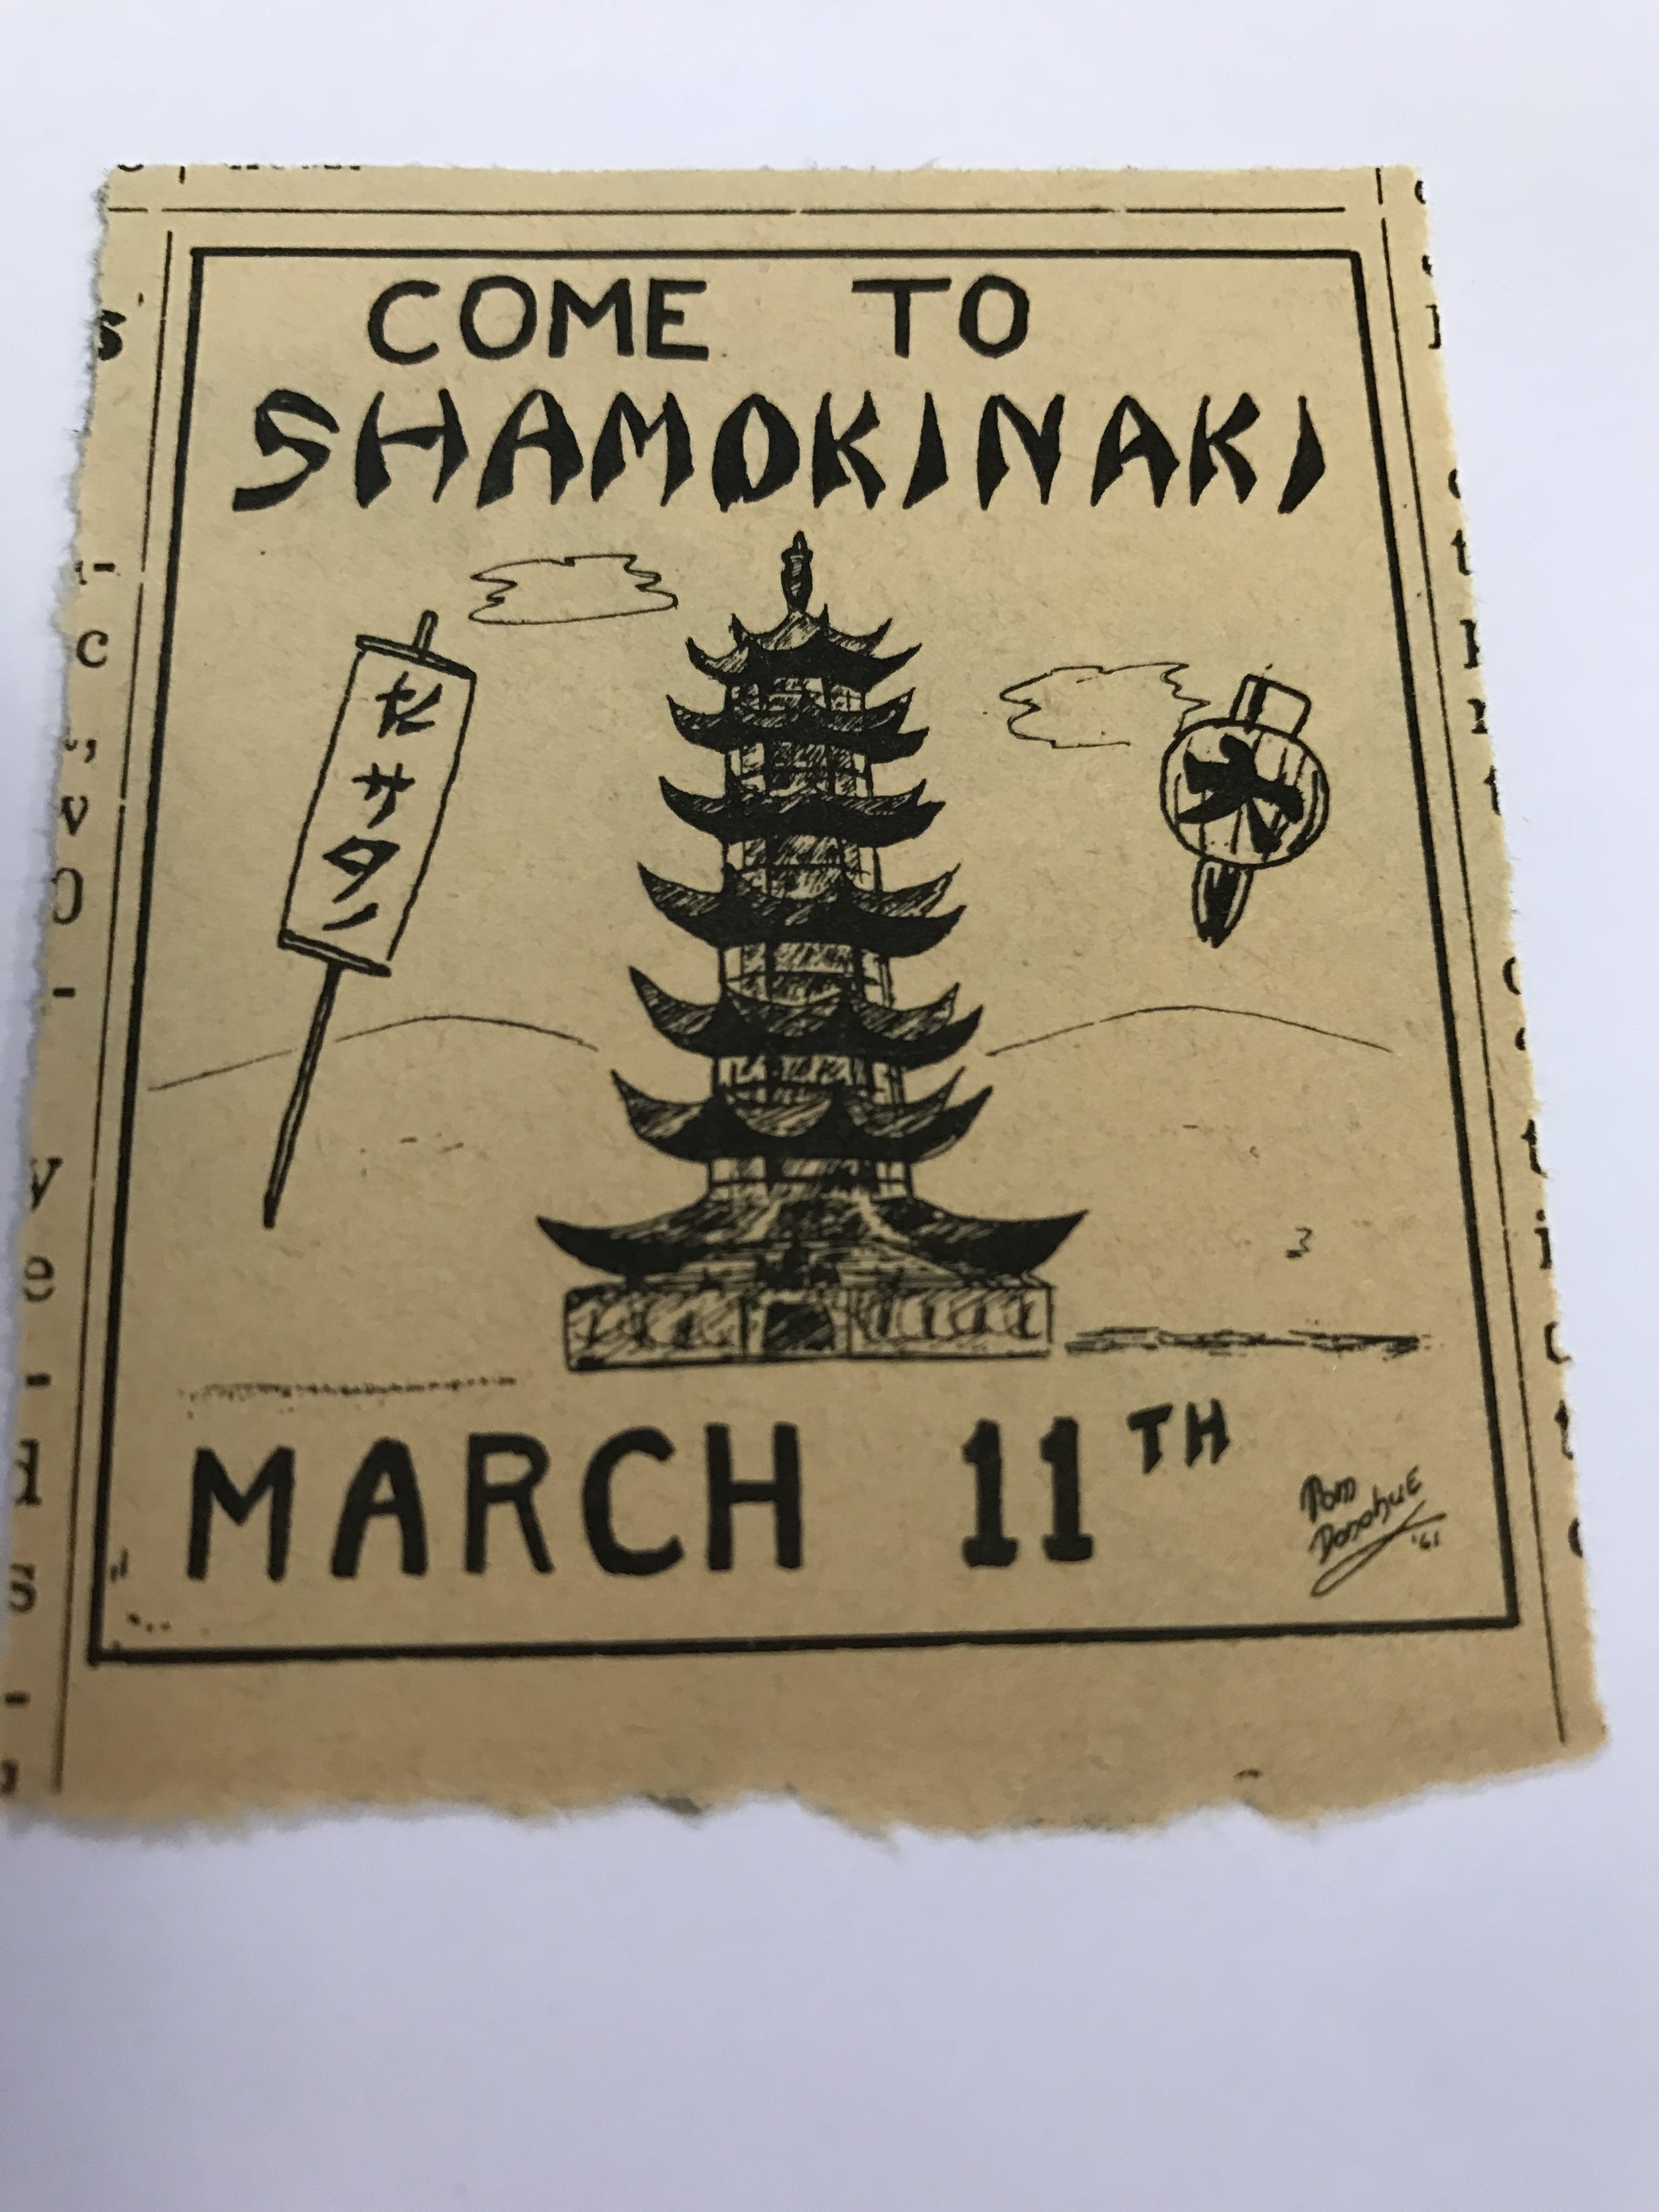 A poster from the annual Shamokinaki dance to raise funds for the Japanese mission. 